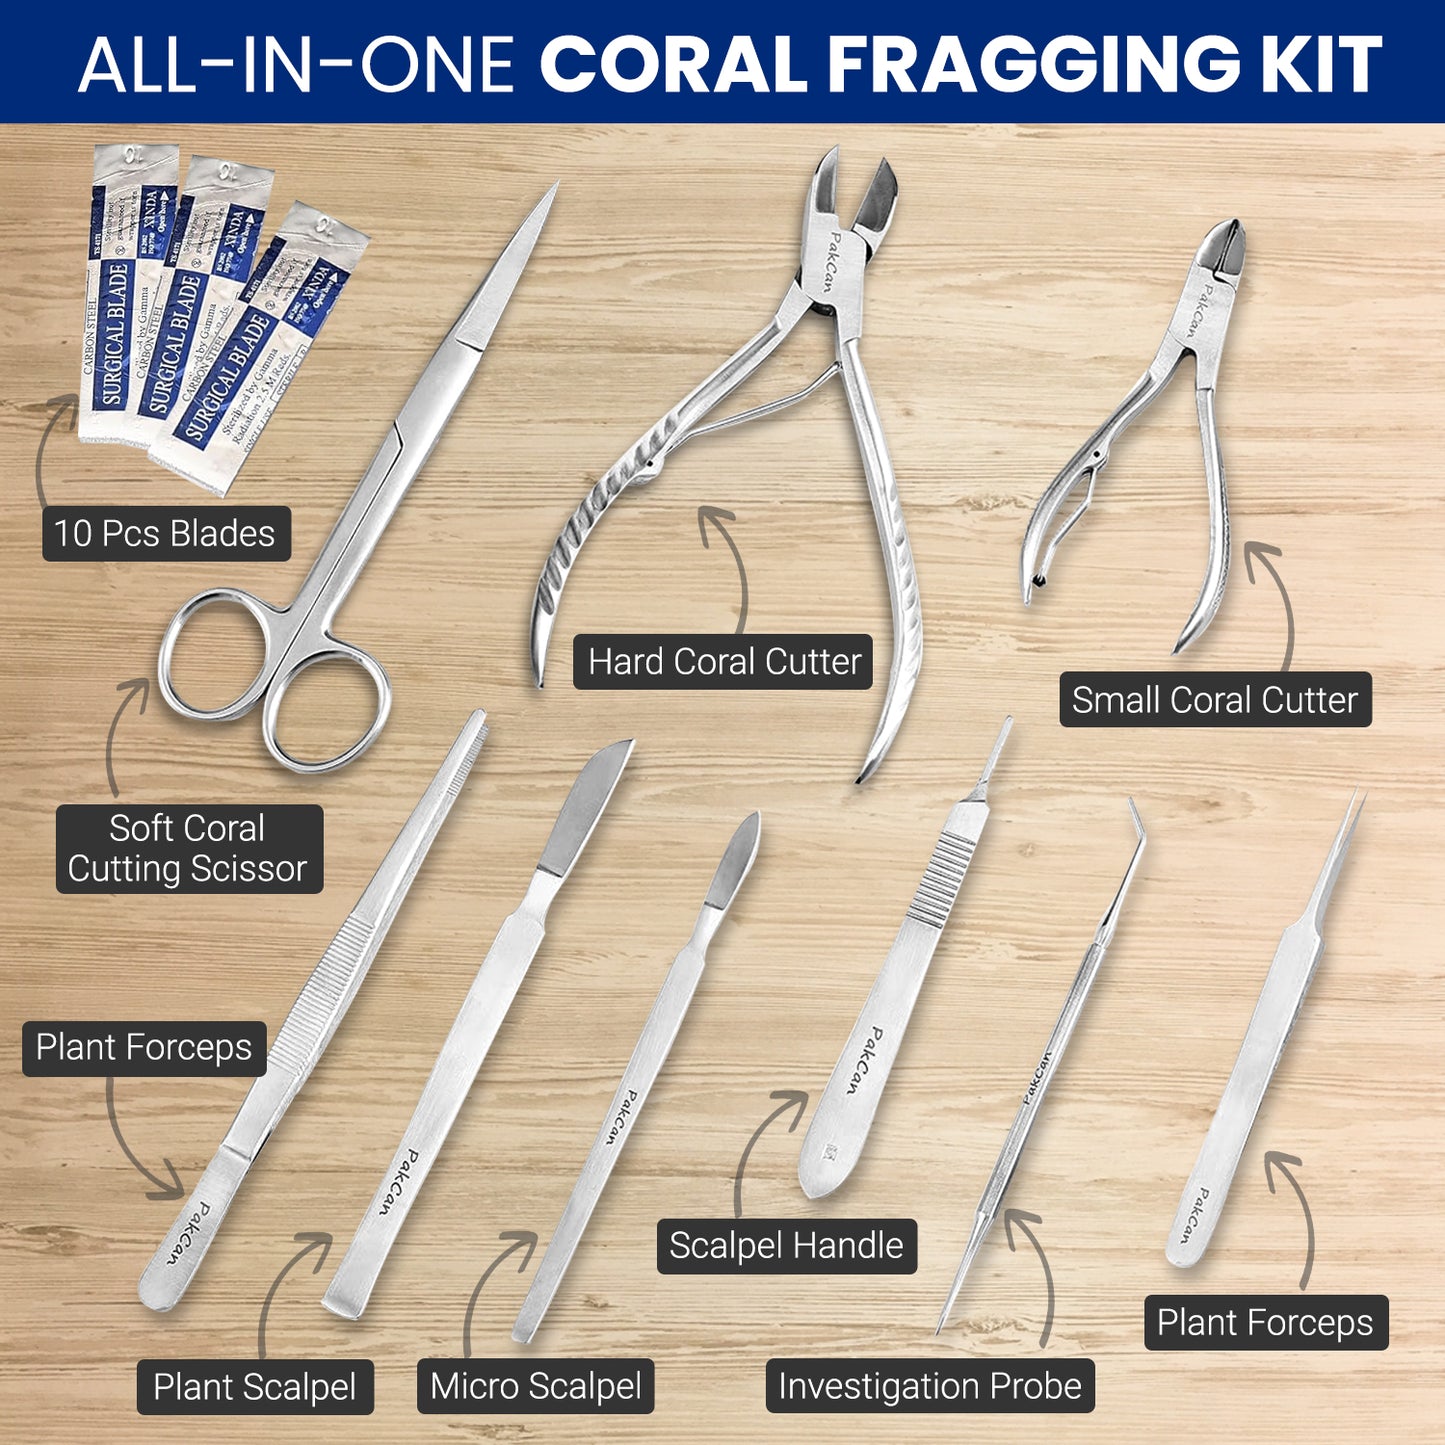 Premium Coral Fragging Kit - Complete Coral Propagation and Fragging Set